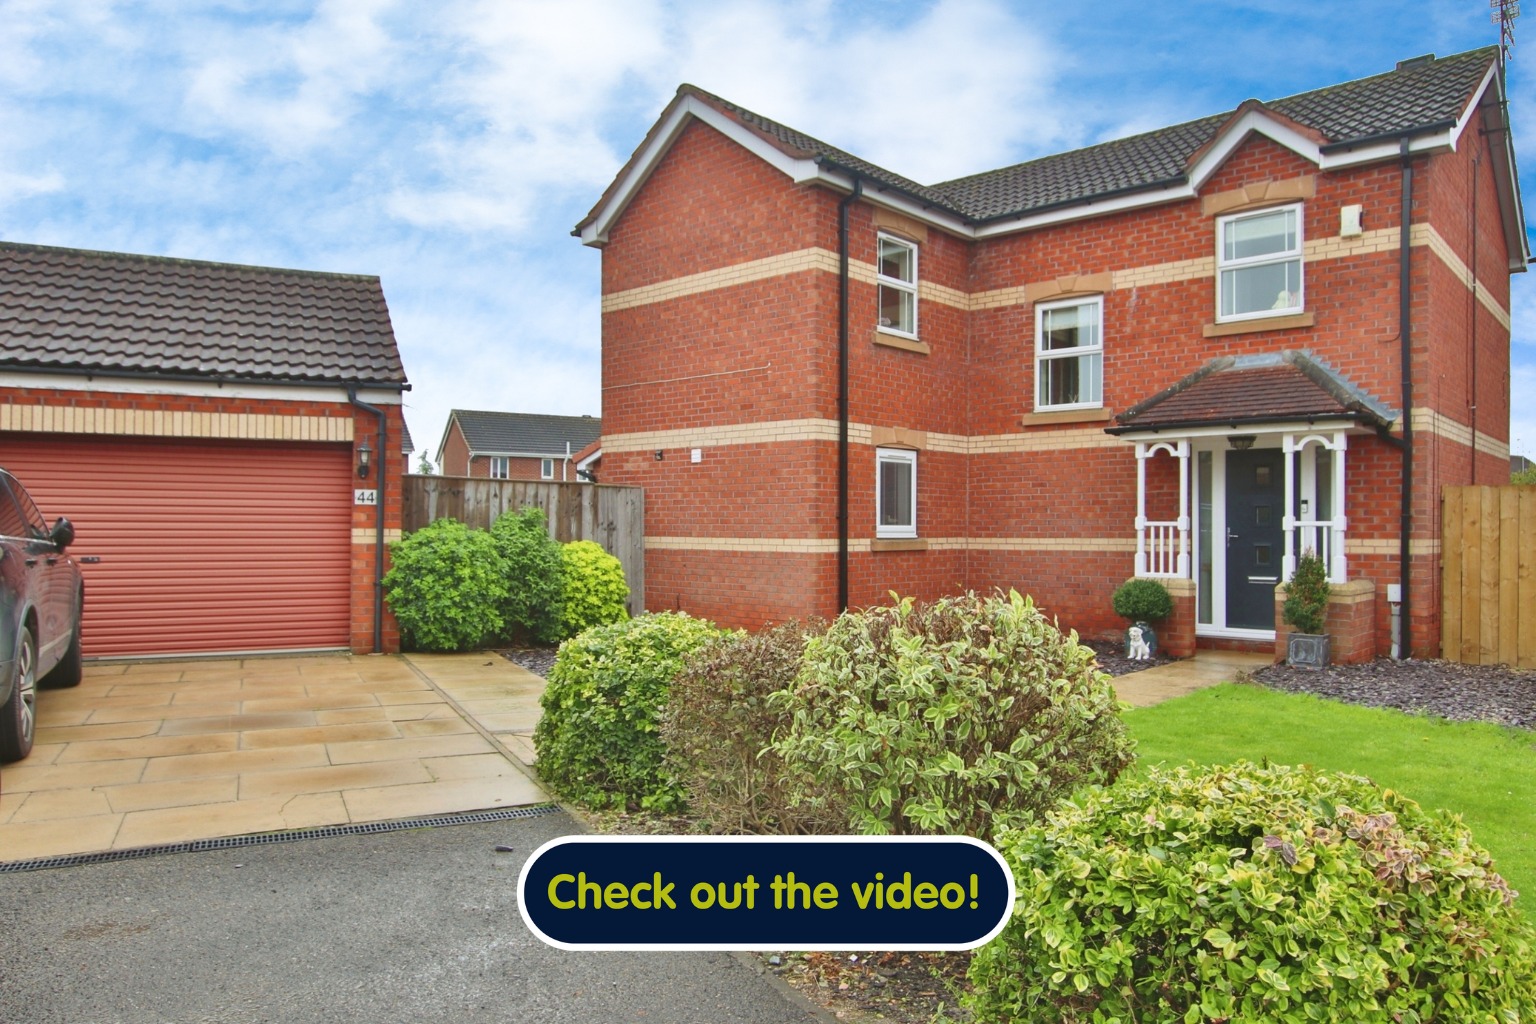 4 bed detached house for sale in Nornabell Drive, Beverley - Property Image 1